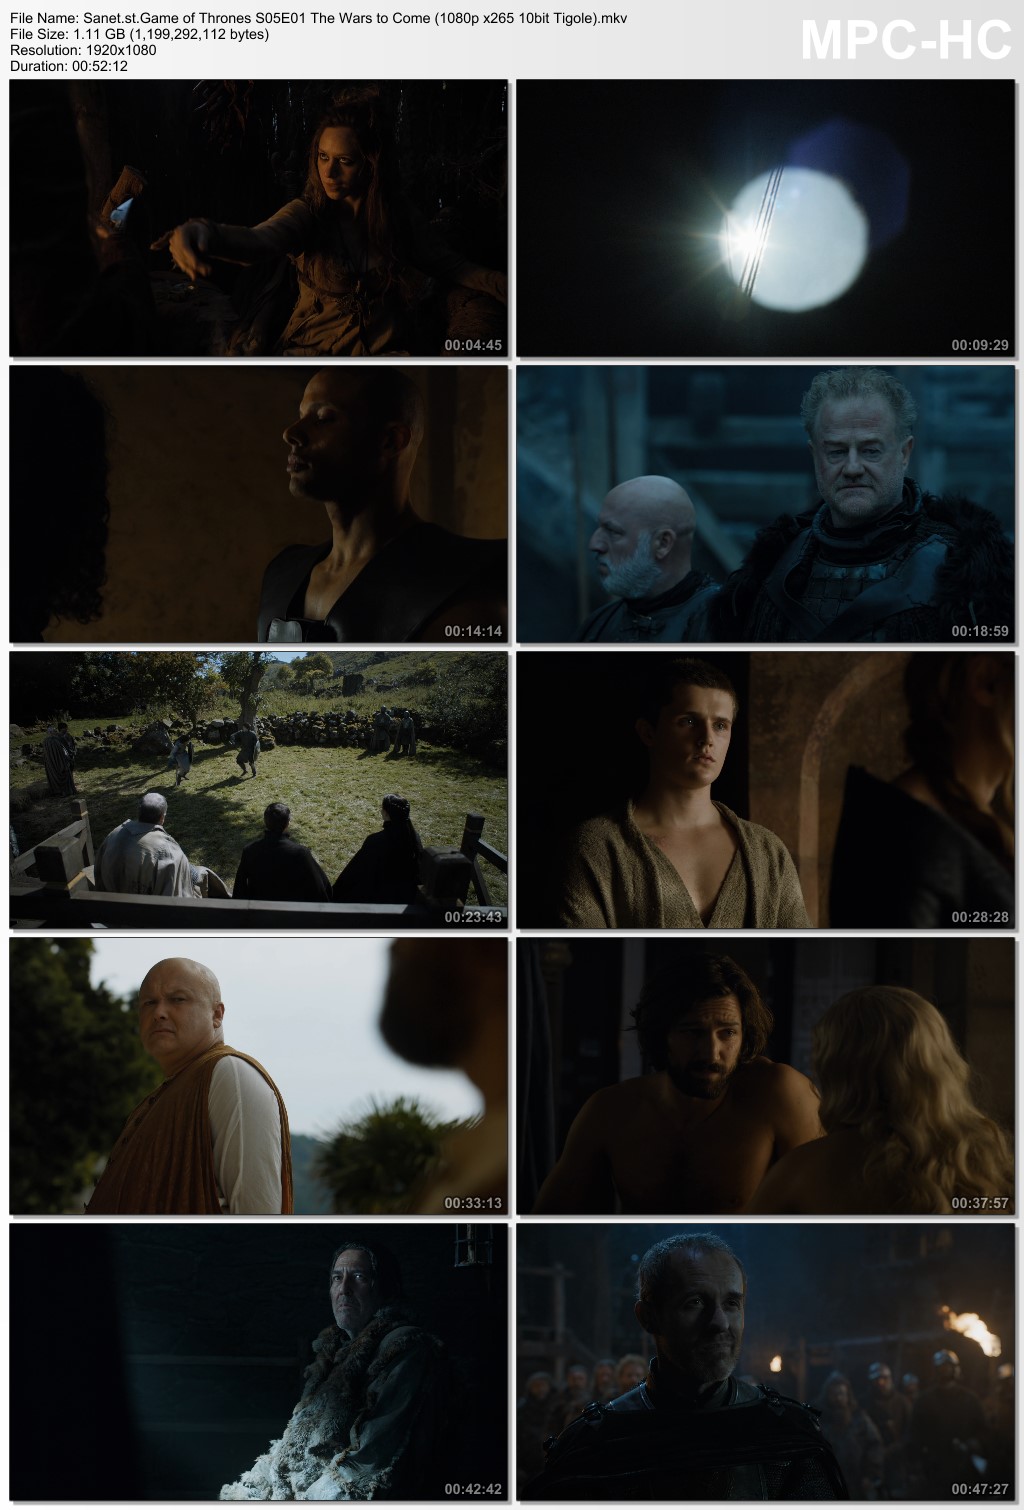 Download game of thrones s05 full free online